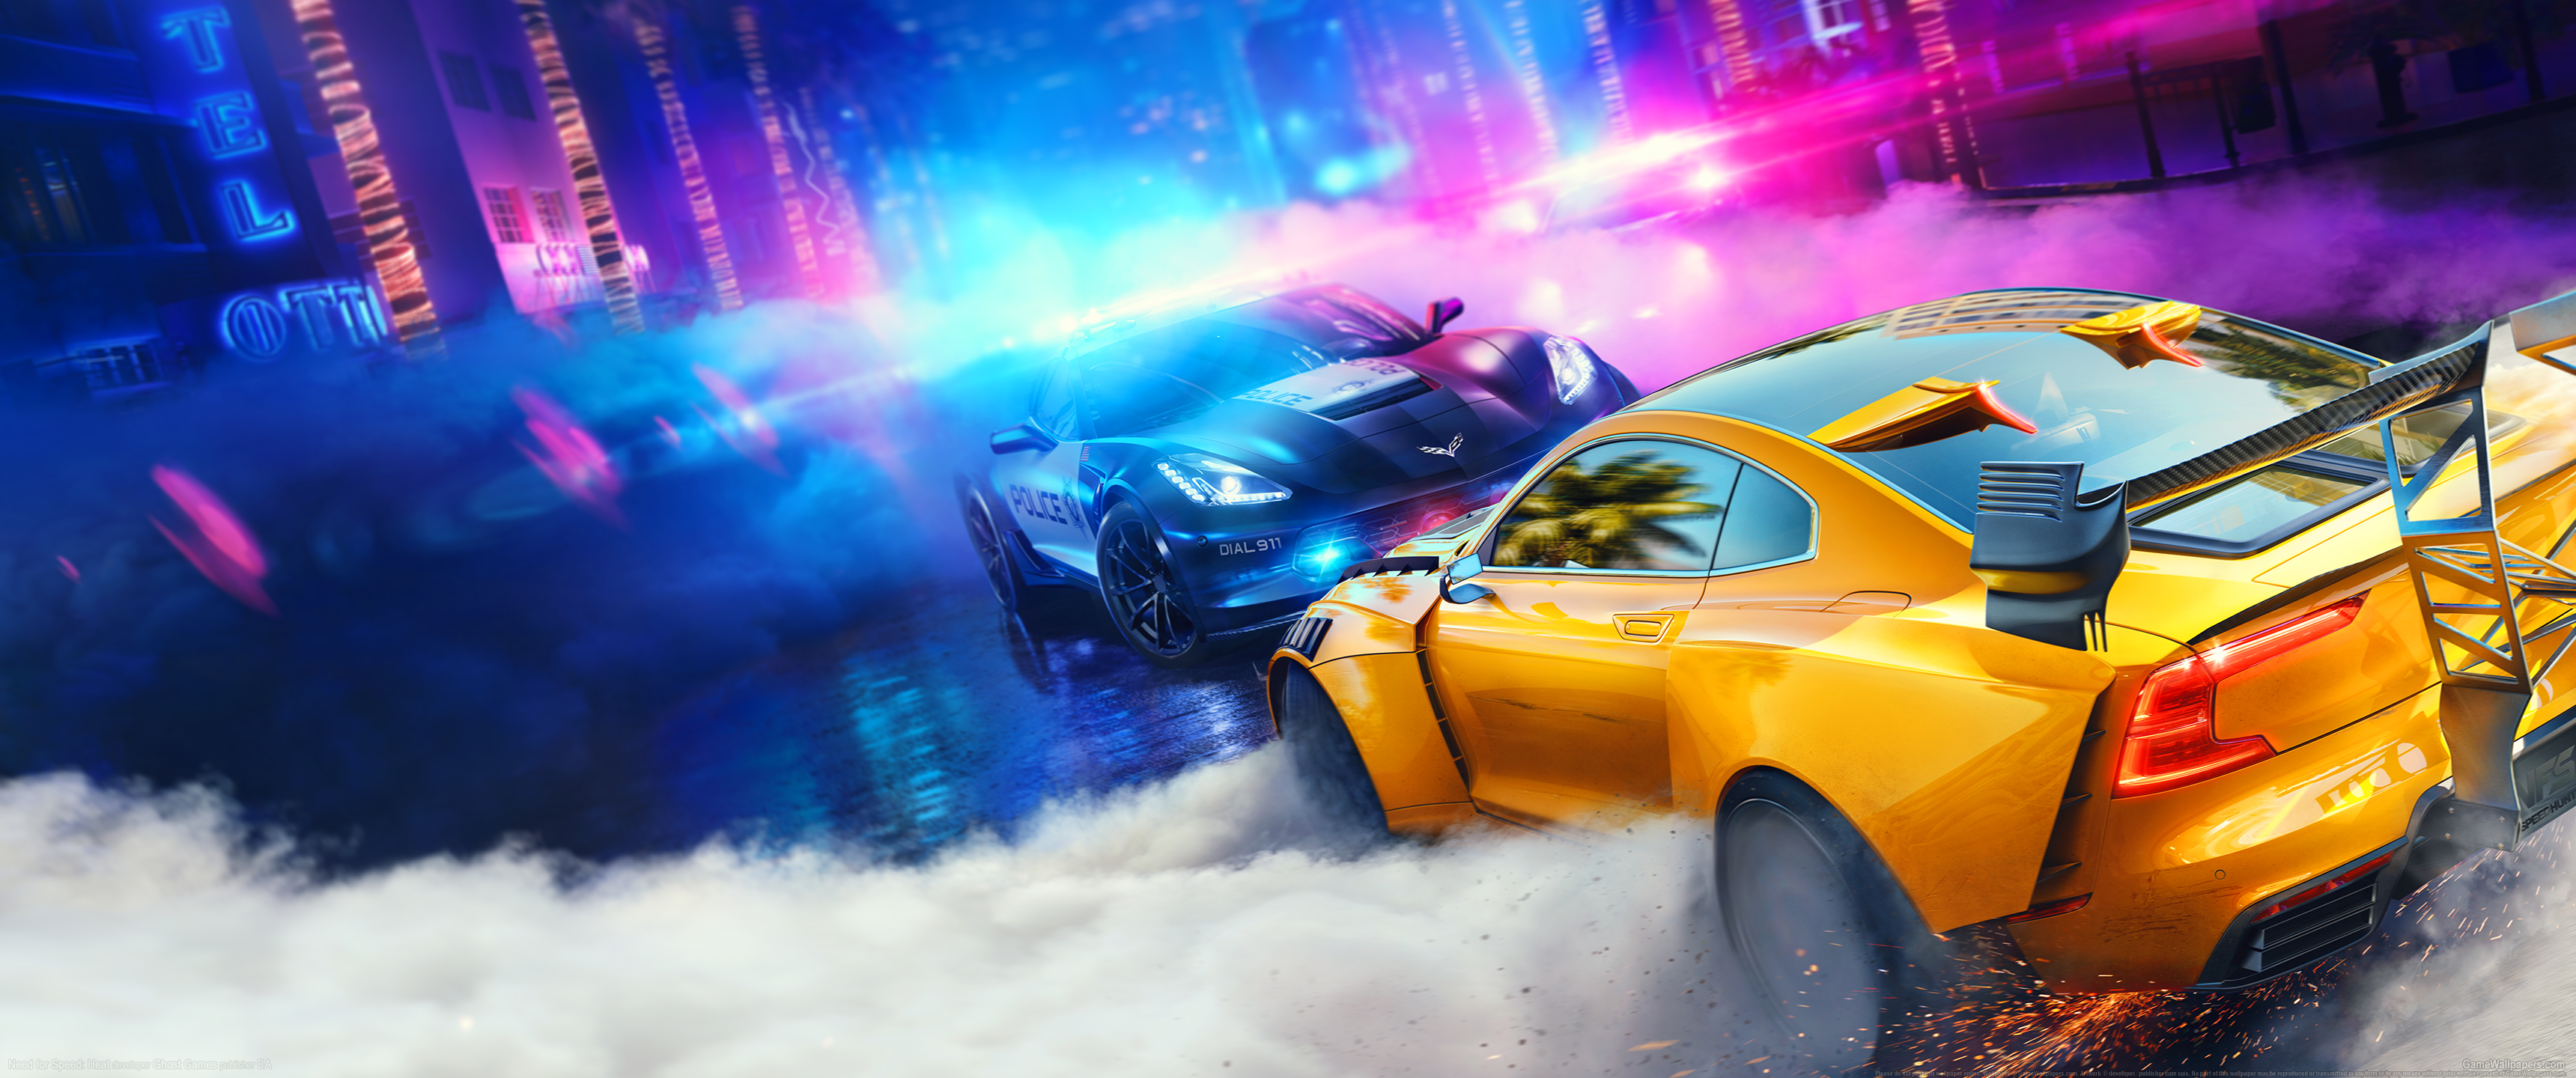 Need for Speed: Heat 3440x1440 wallpaper or background 01